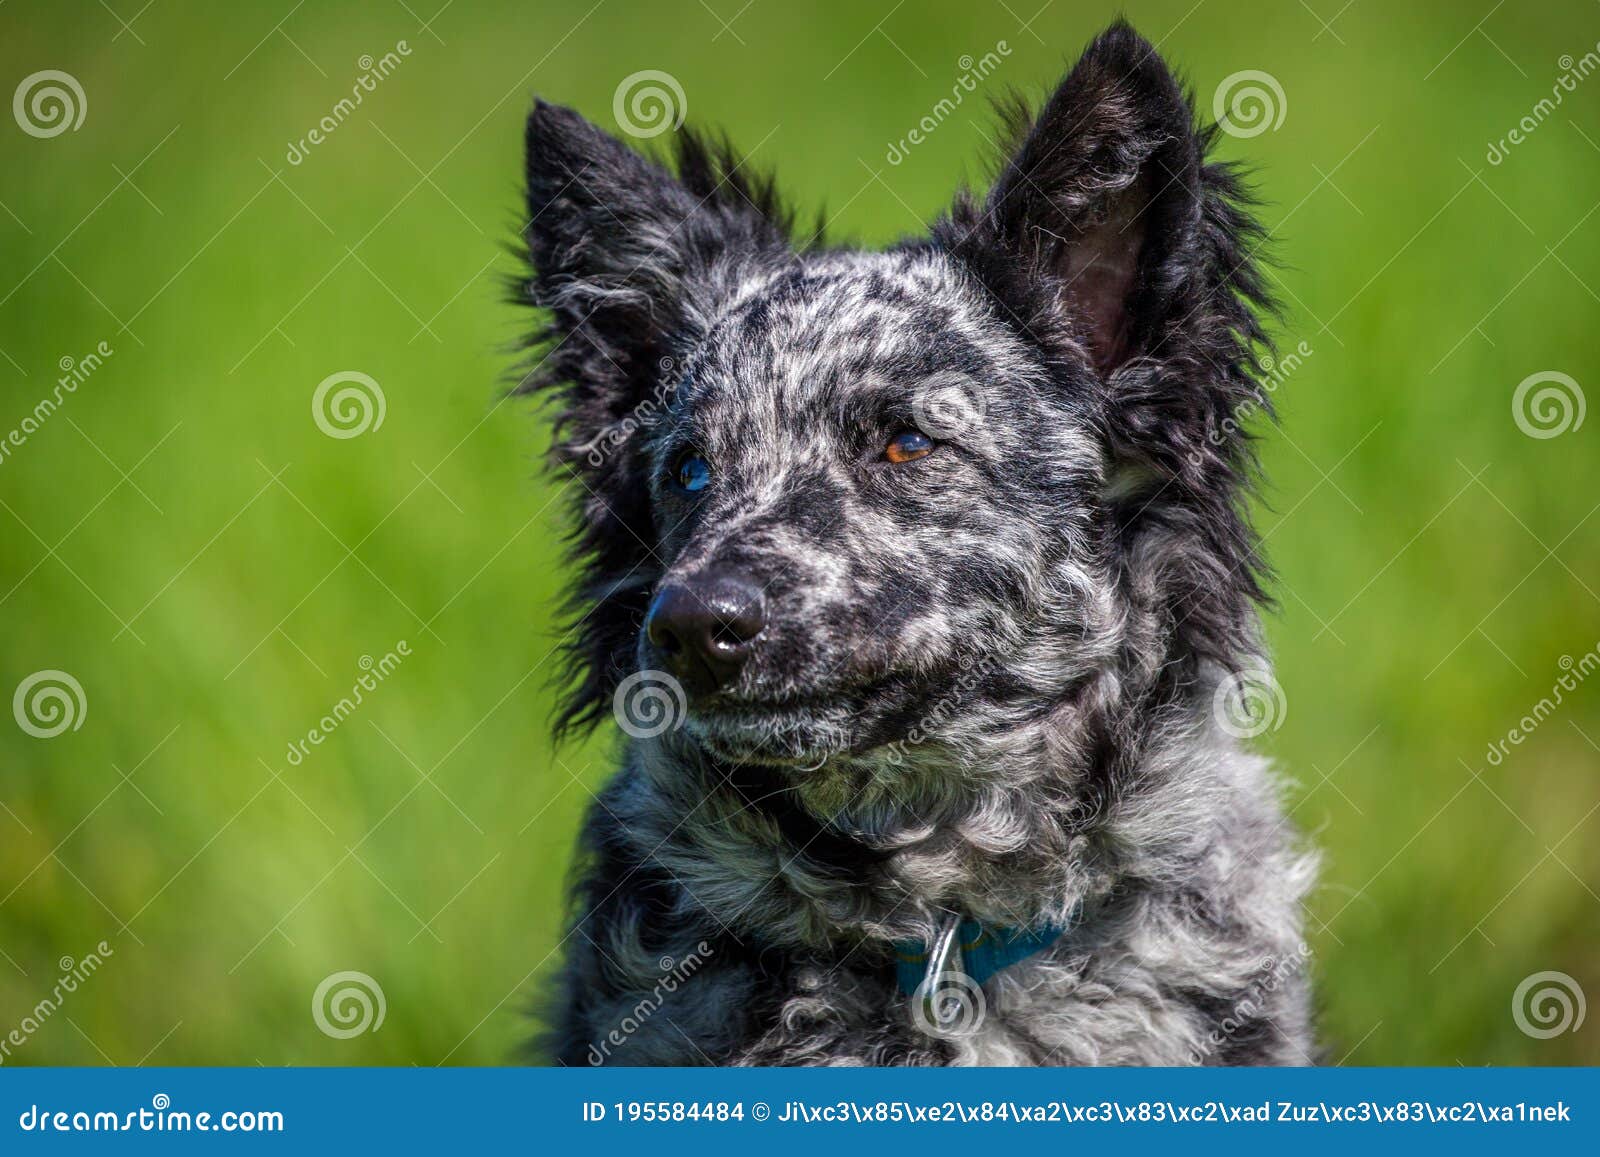 66 Mudi Dog Photos Free Royalty Free Stock Photos From Dreamstime